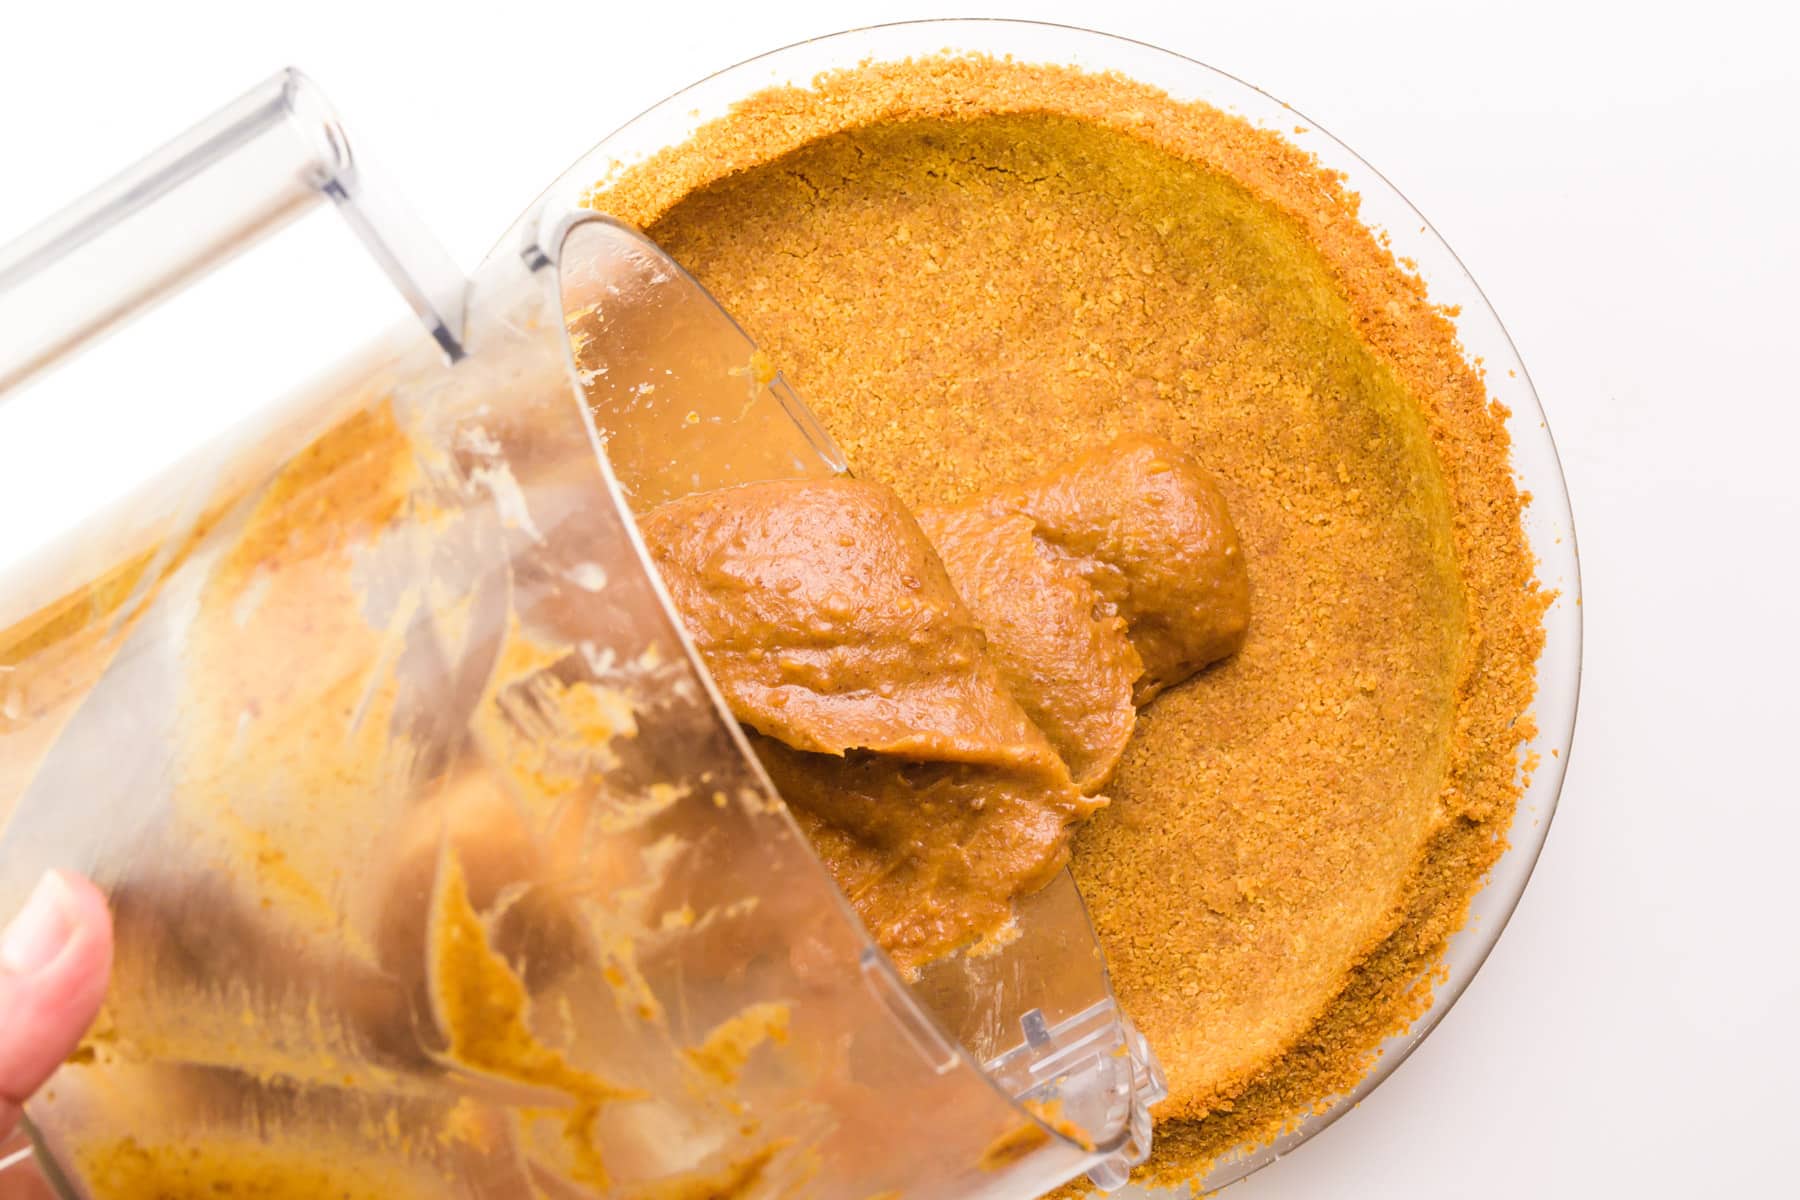 A caramel mixture is being poured from a food processor bowl into a graham cracker crust.